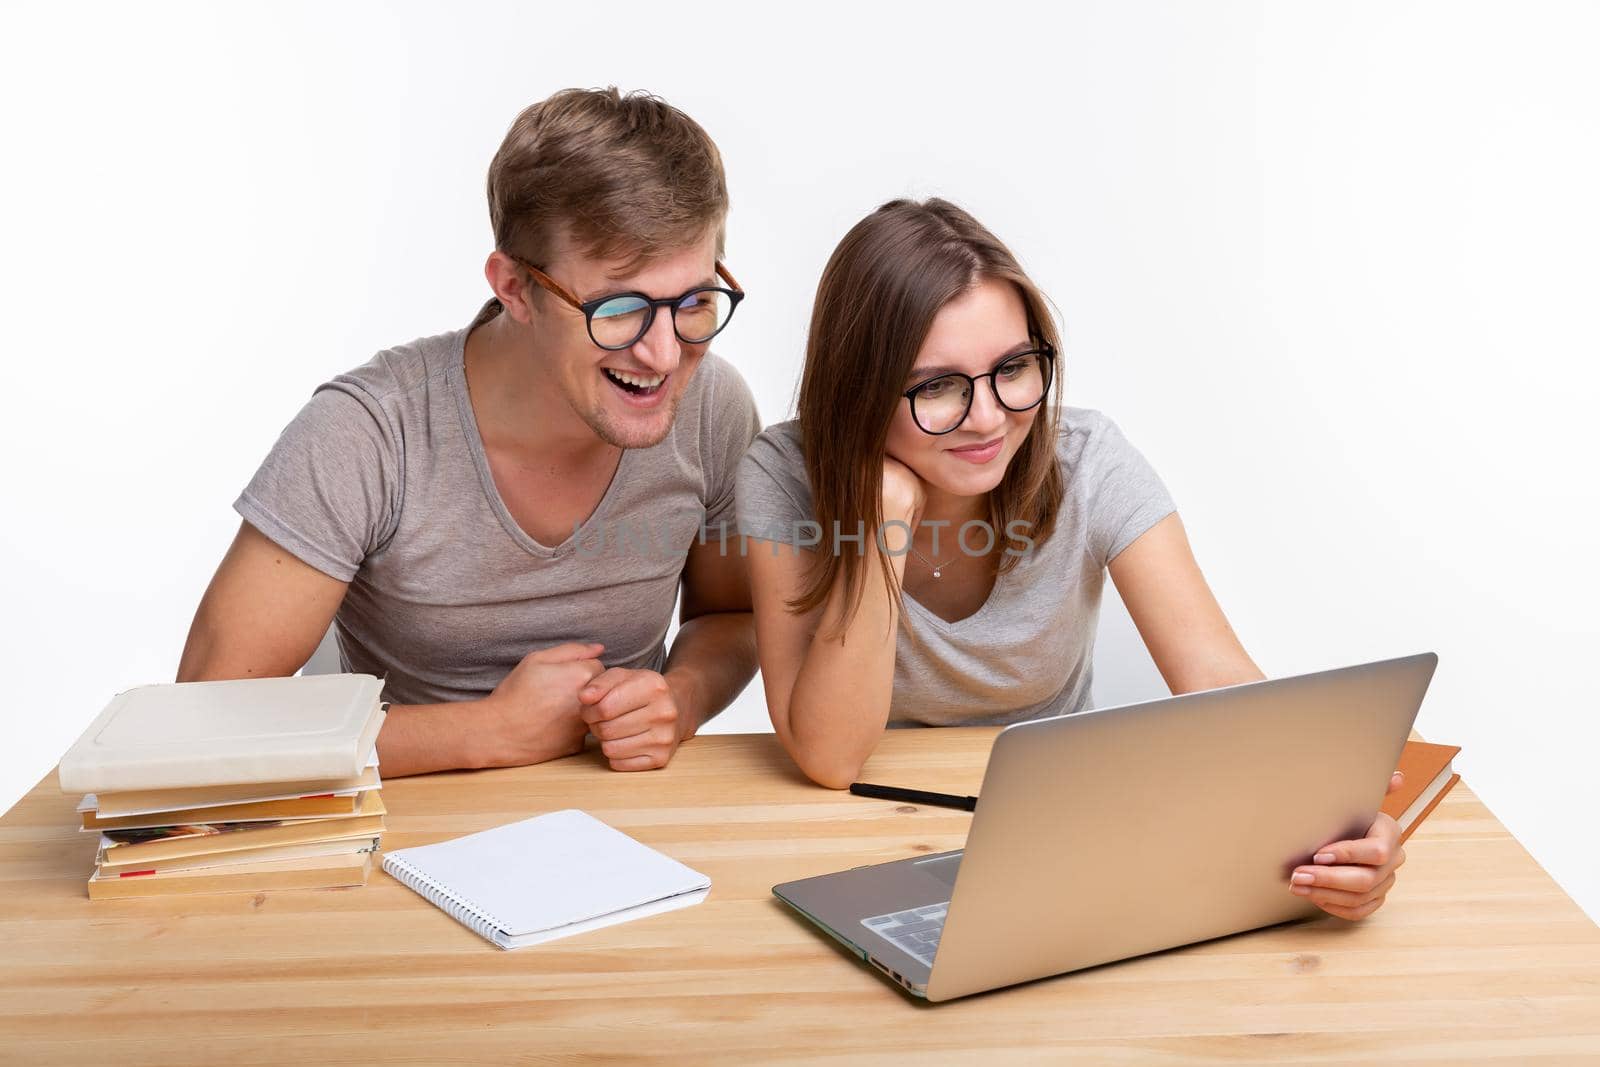 People and education concept - Two happy funny students sitting at the wooden table with laptop and books.